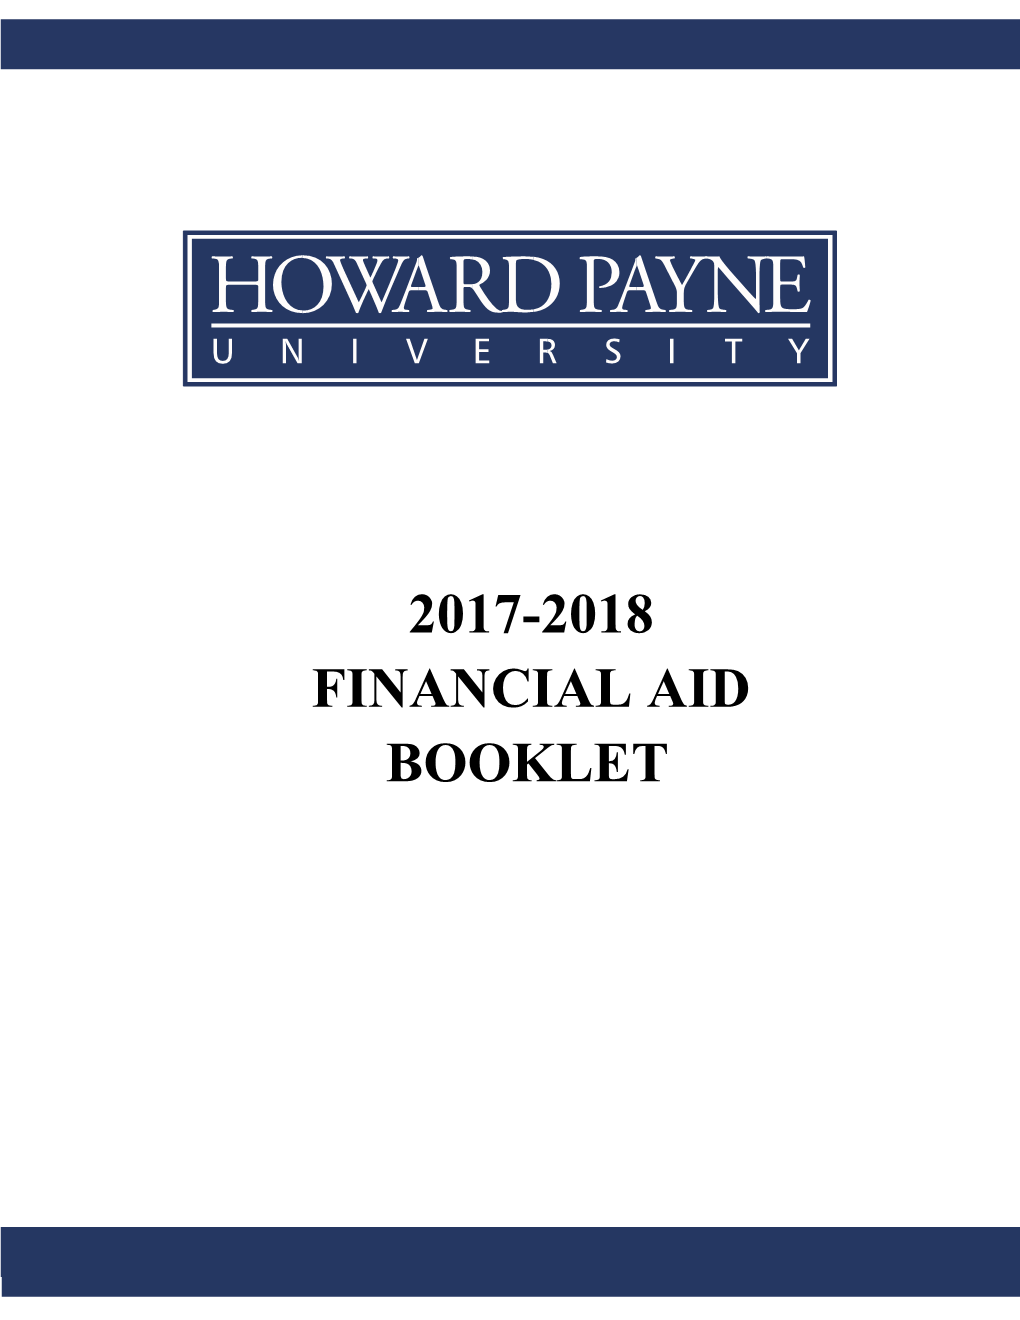 2017-2018 Financial Aid Booklet